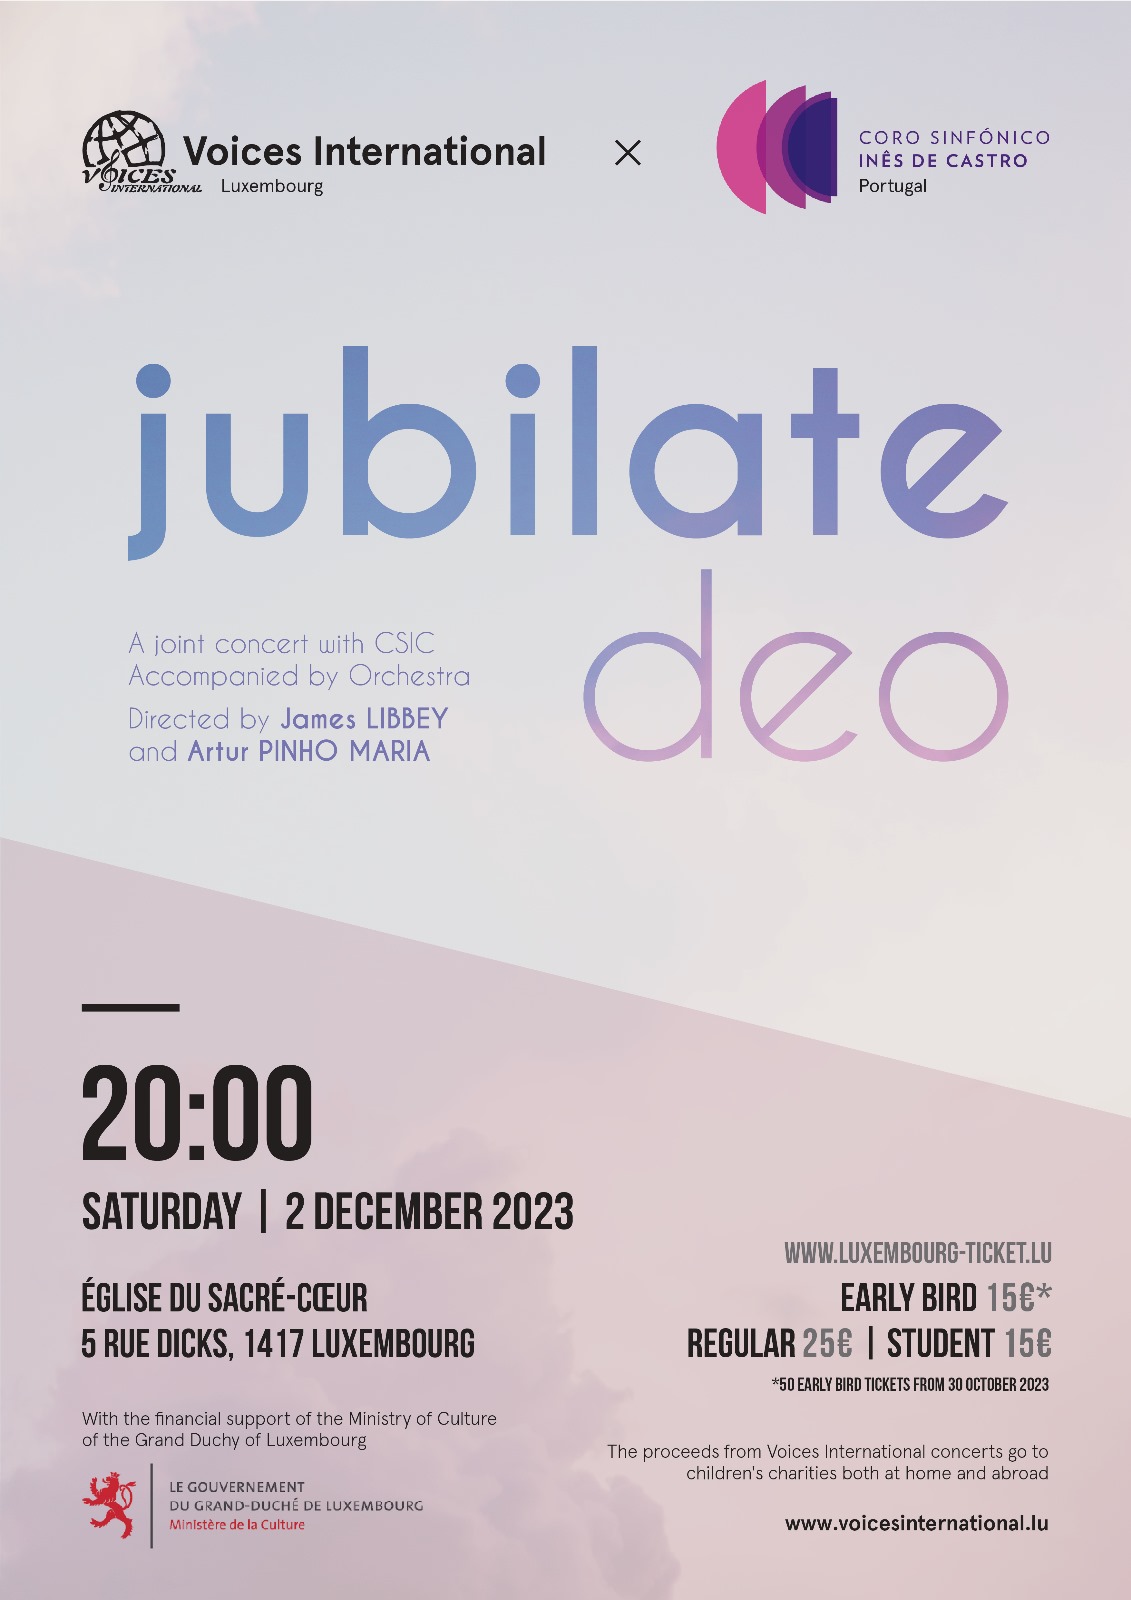 Dan Forrest's "Jubilate Deo" - concert by Voices International and Coro Sinfónico Inês de Castro